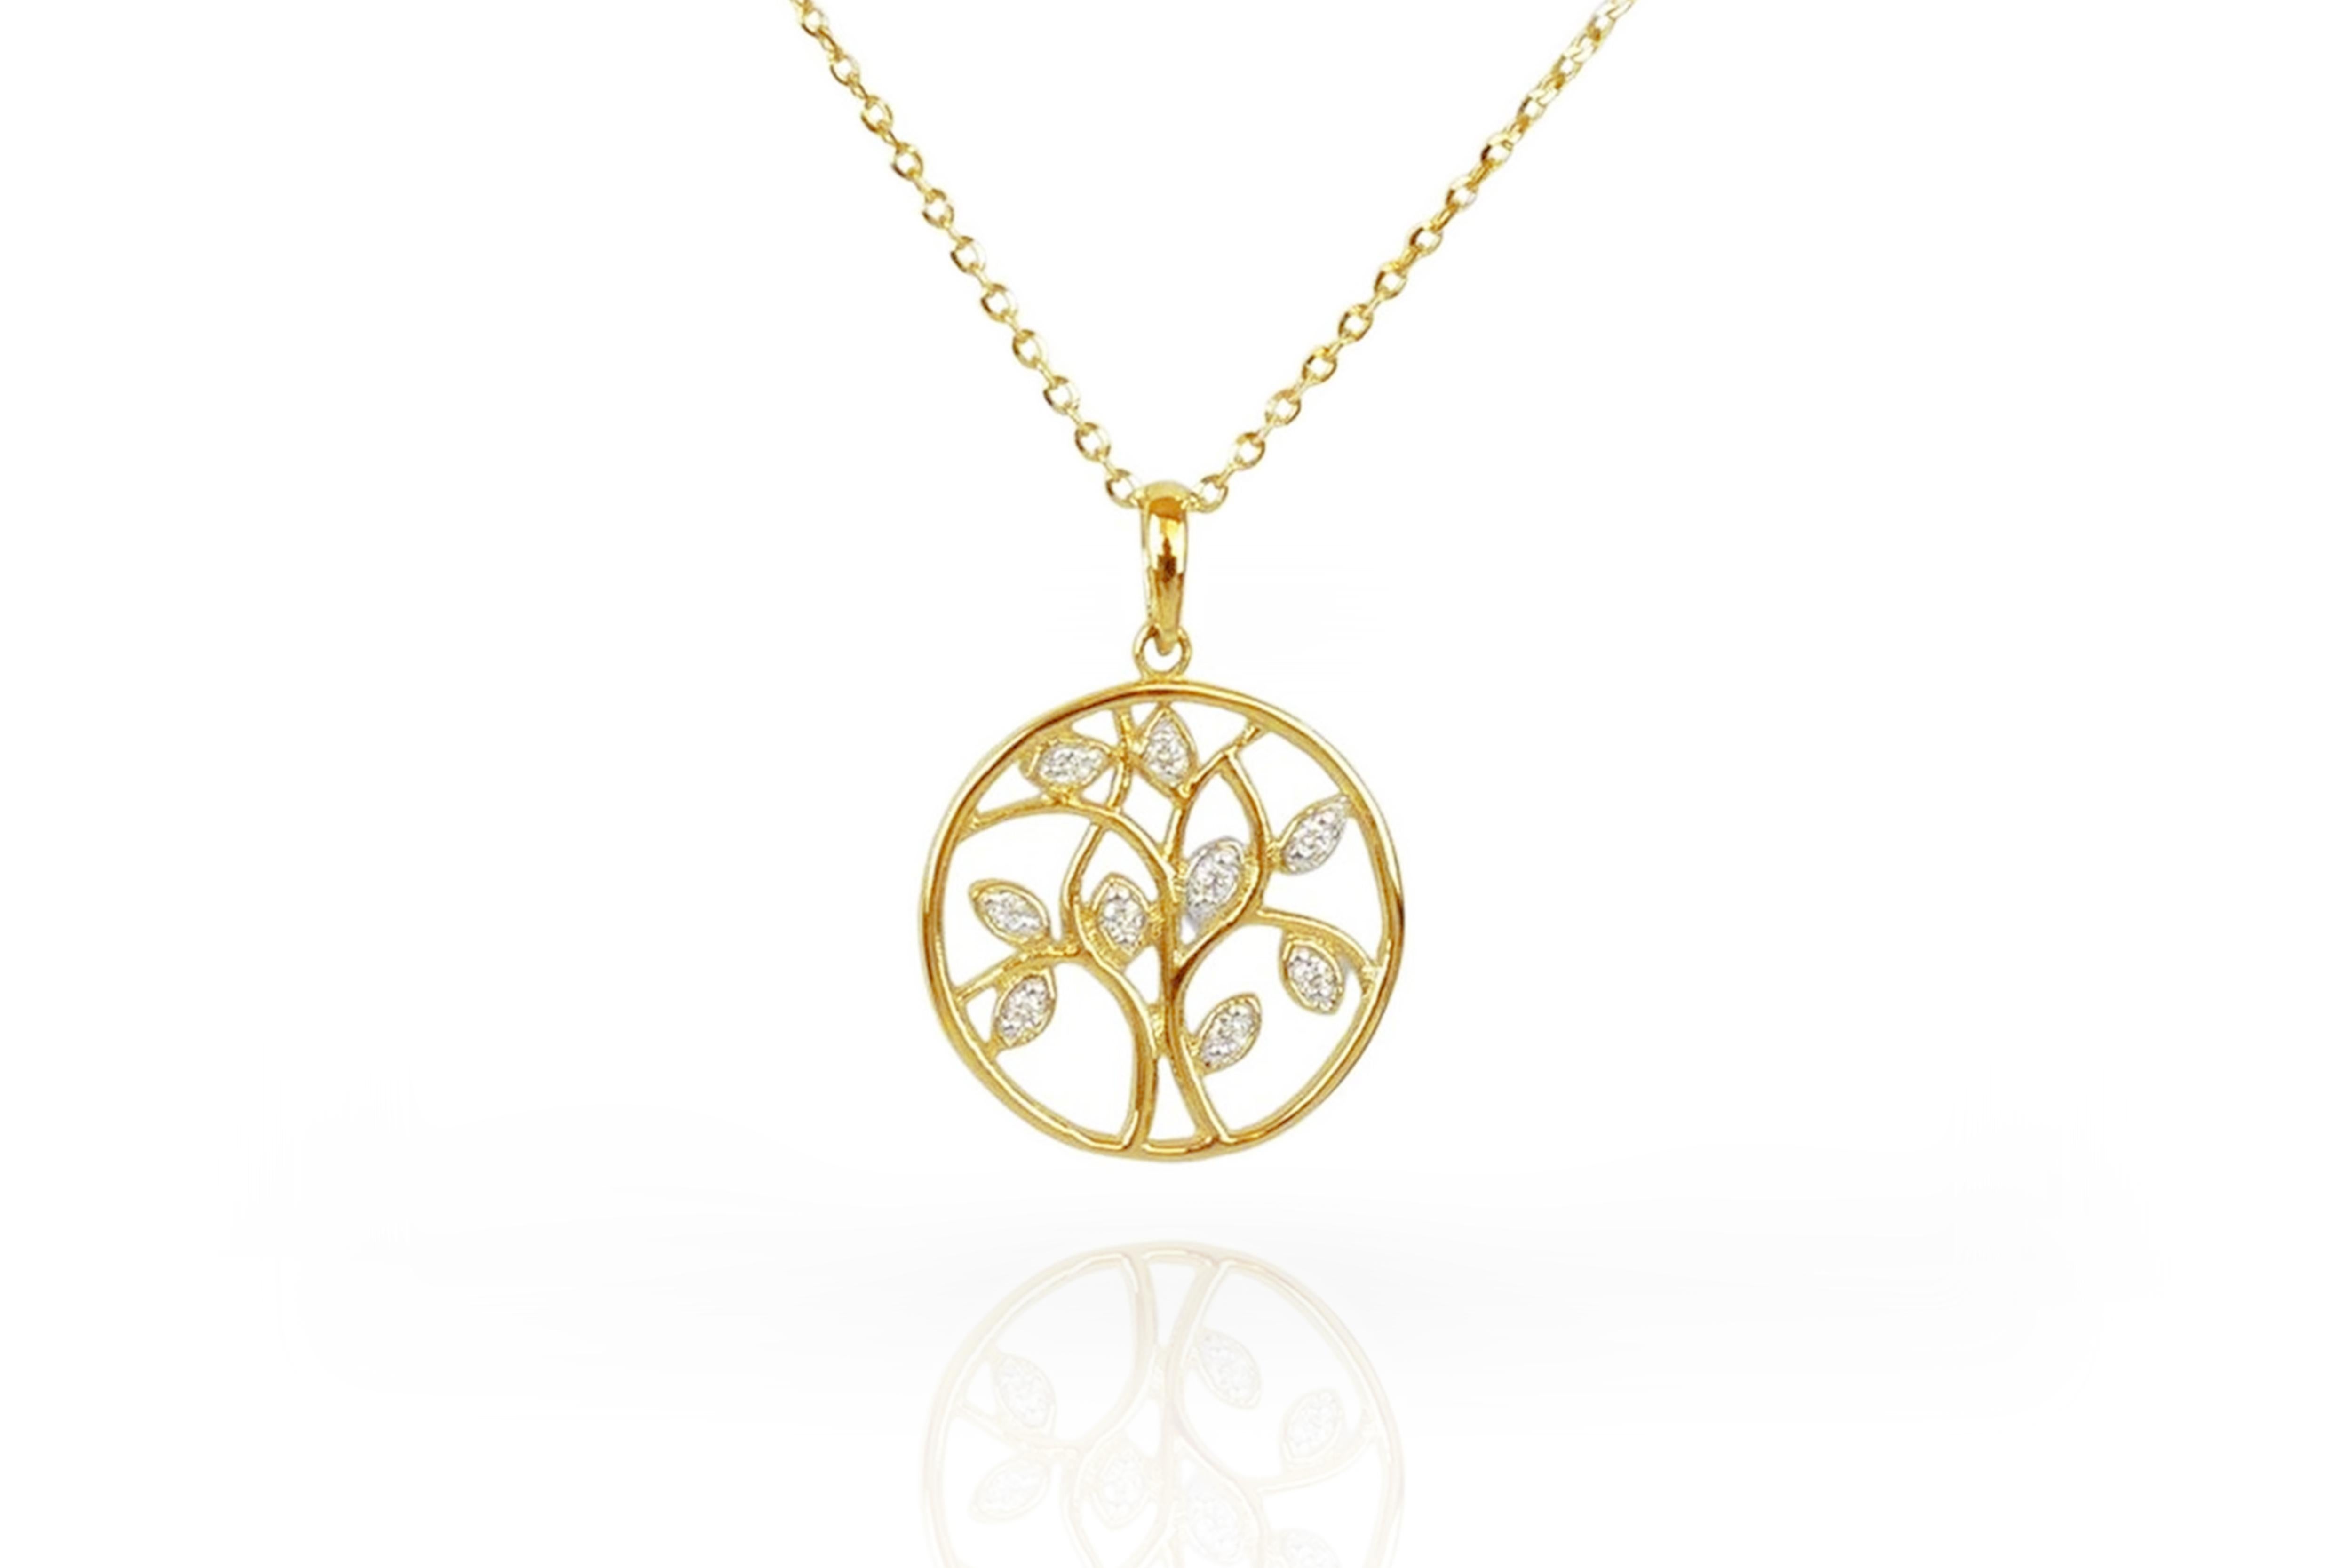 Tree of Life Pendent with Diamond Accents Floating On Delicate Thin Gold Chain in 18k White Gold / Rose Gold / Yellow Gold.

9 round cut diamonds set the shape of the simple and elegant design pendant. The diamonds are very high quality and have a